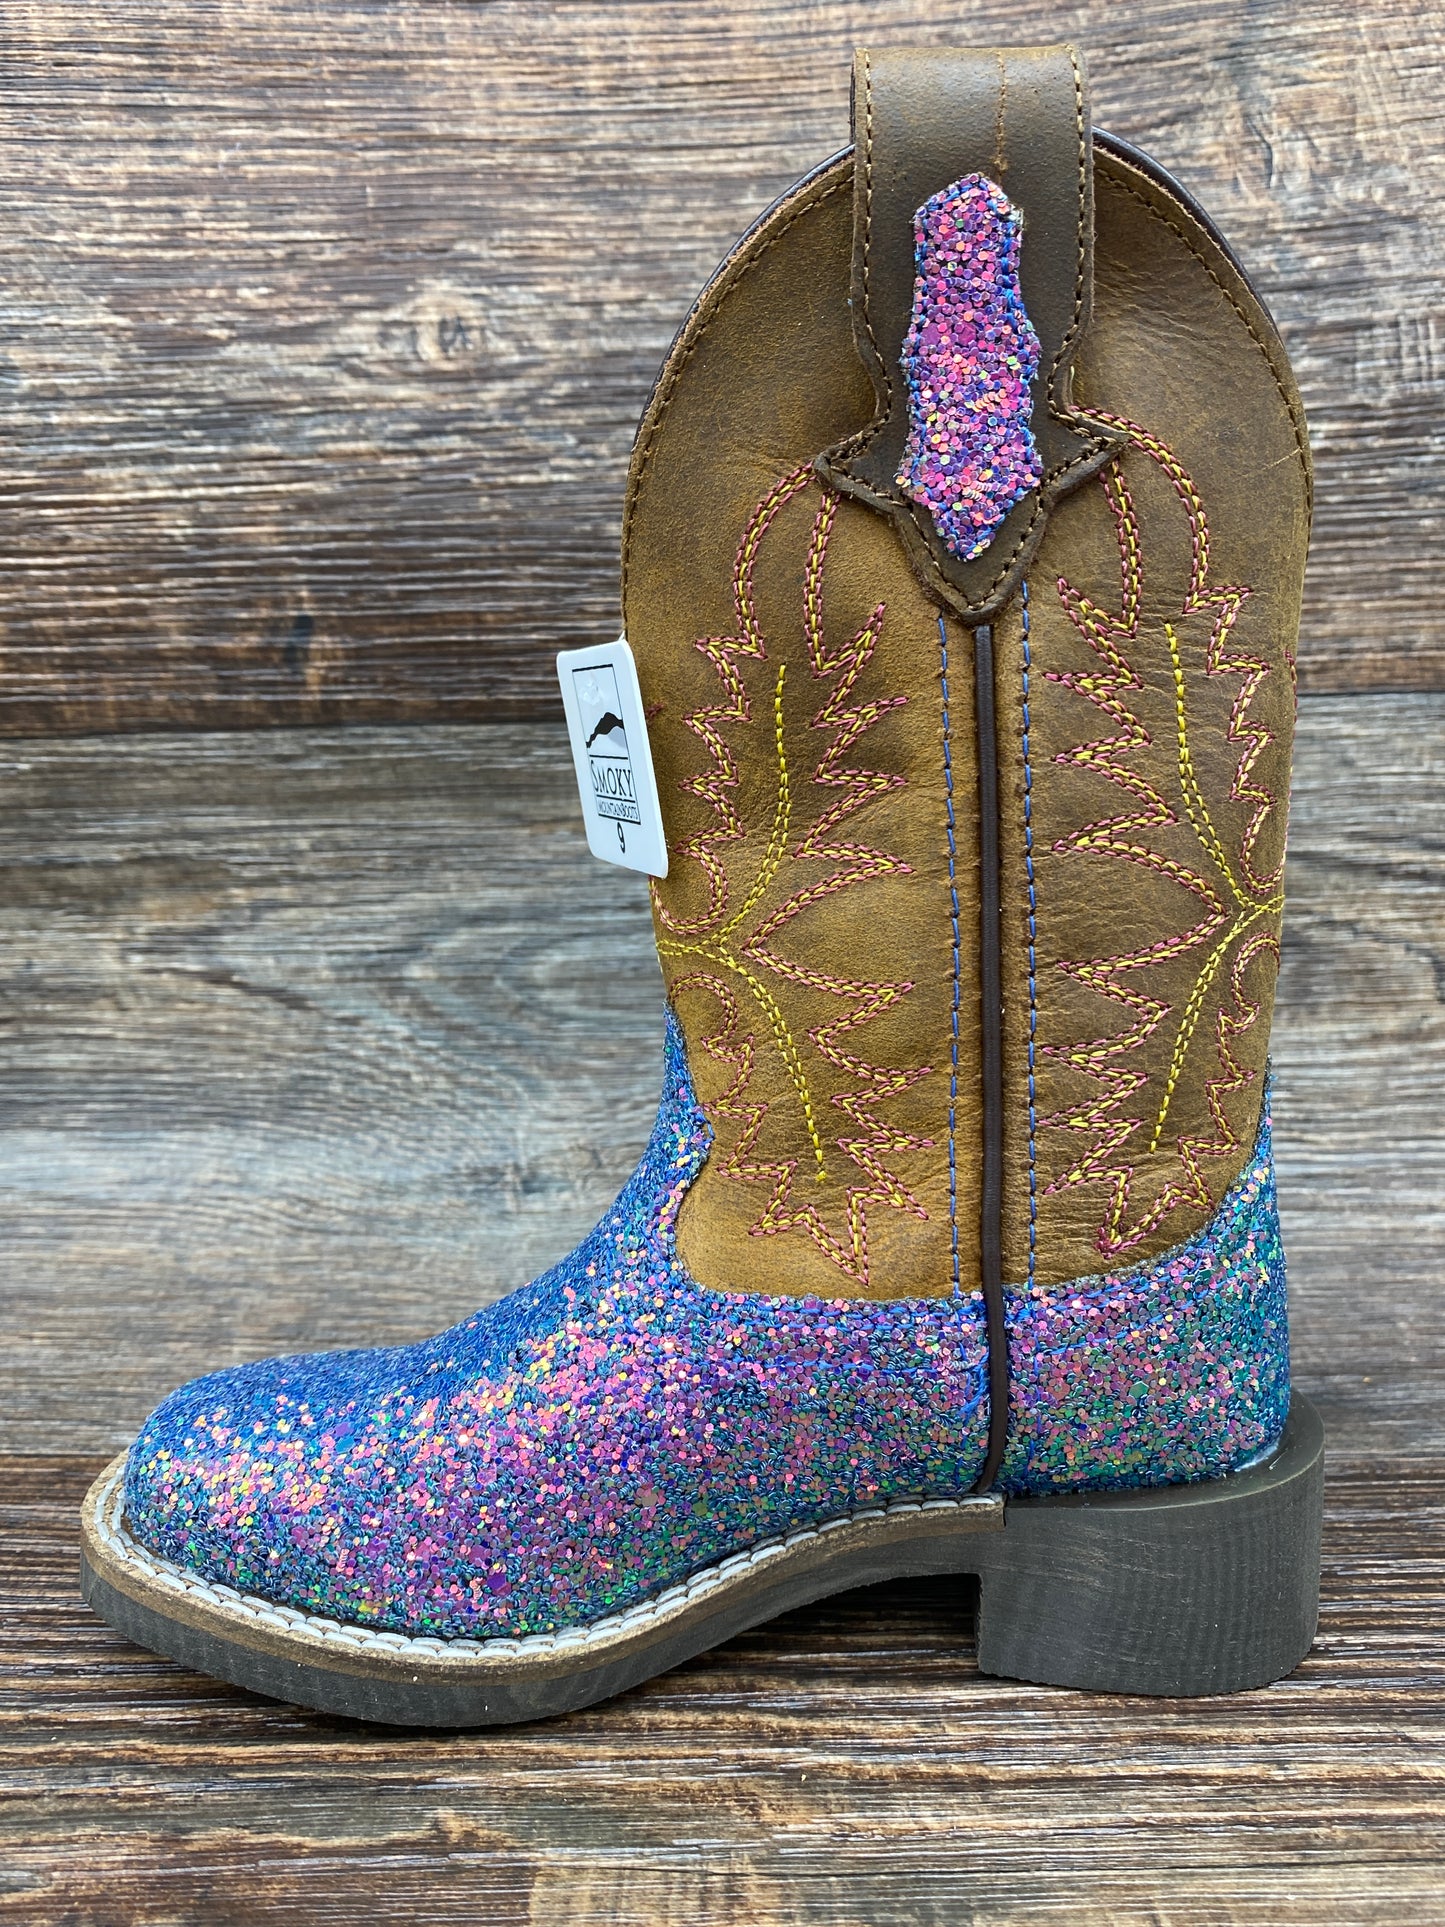 3077y Kid's Pastel Glitter Square Toe Western Boots by Smoky Mountain - 3077Y Youth Sizes 3.5-7